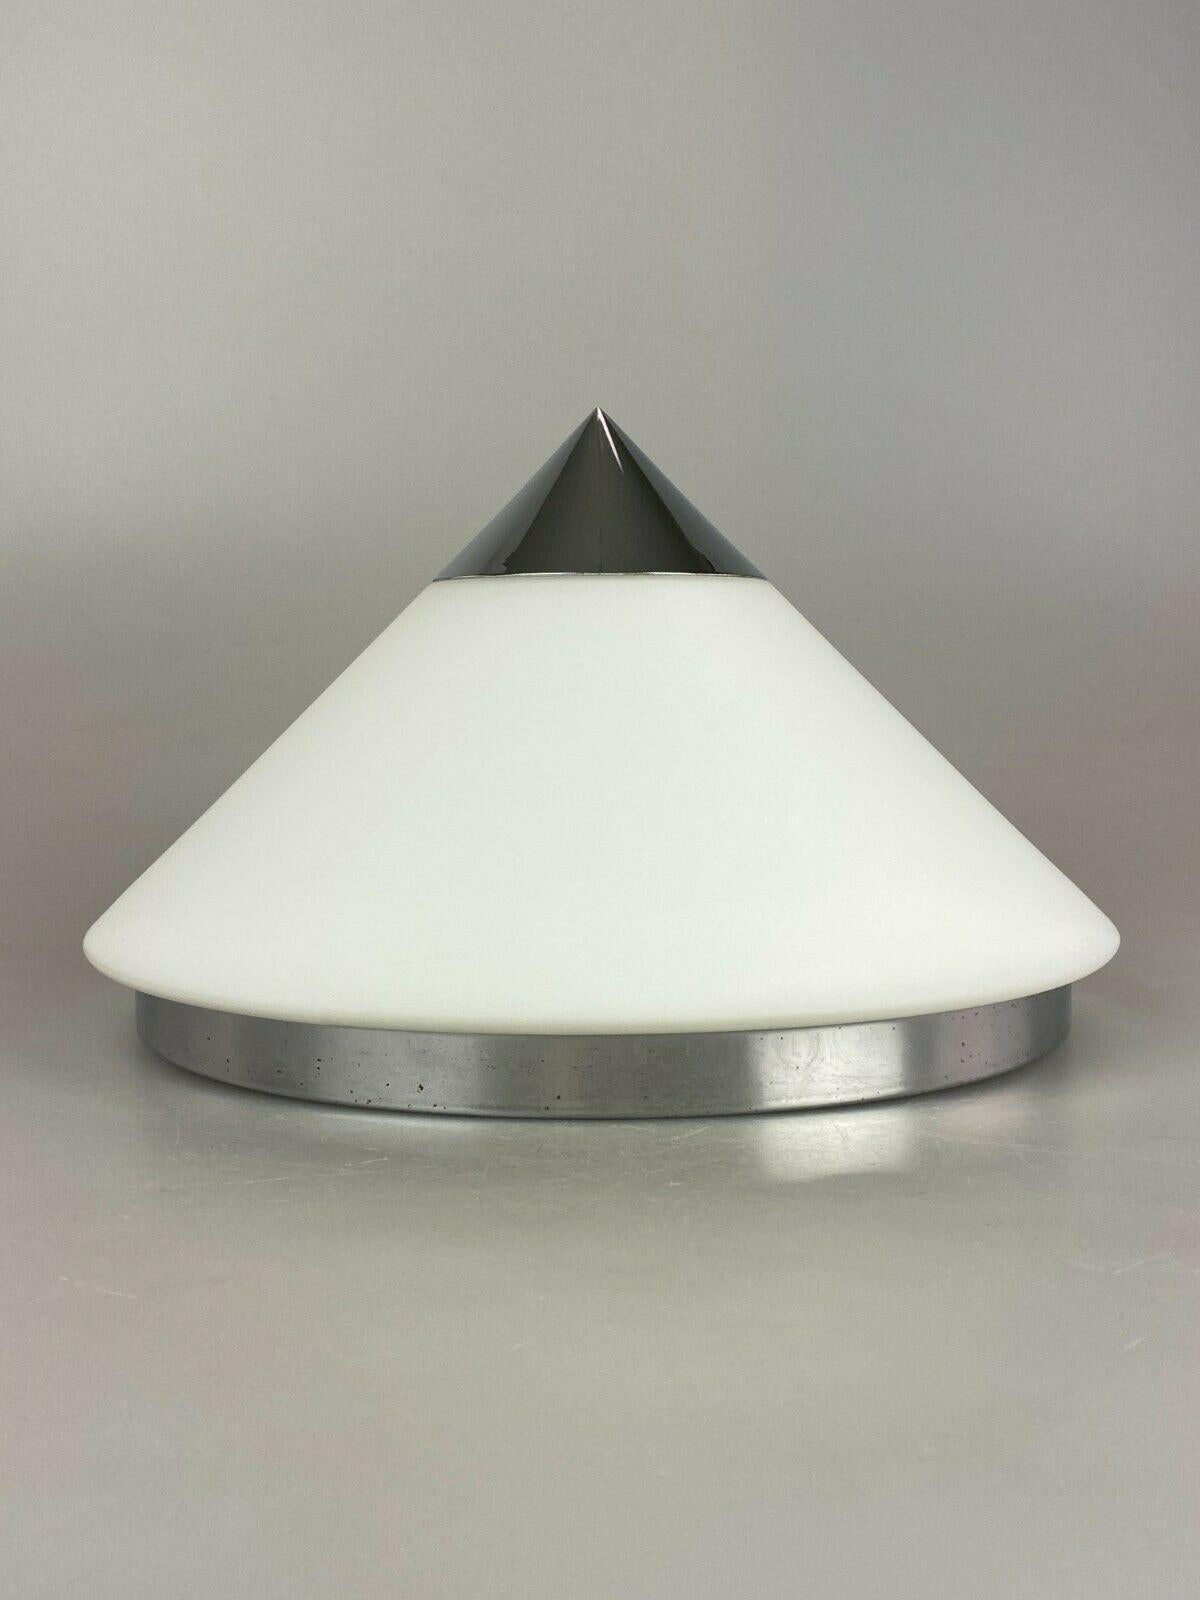 German 60s 70s Lamp Light Wall Lamp Limburg Plafoniere Space Age Design For Sale